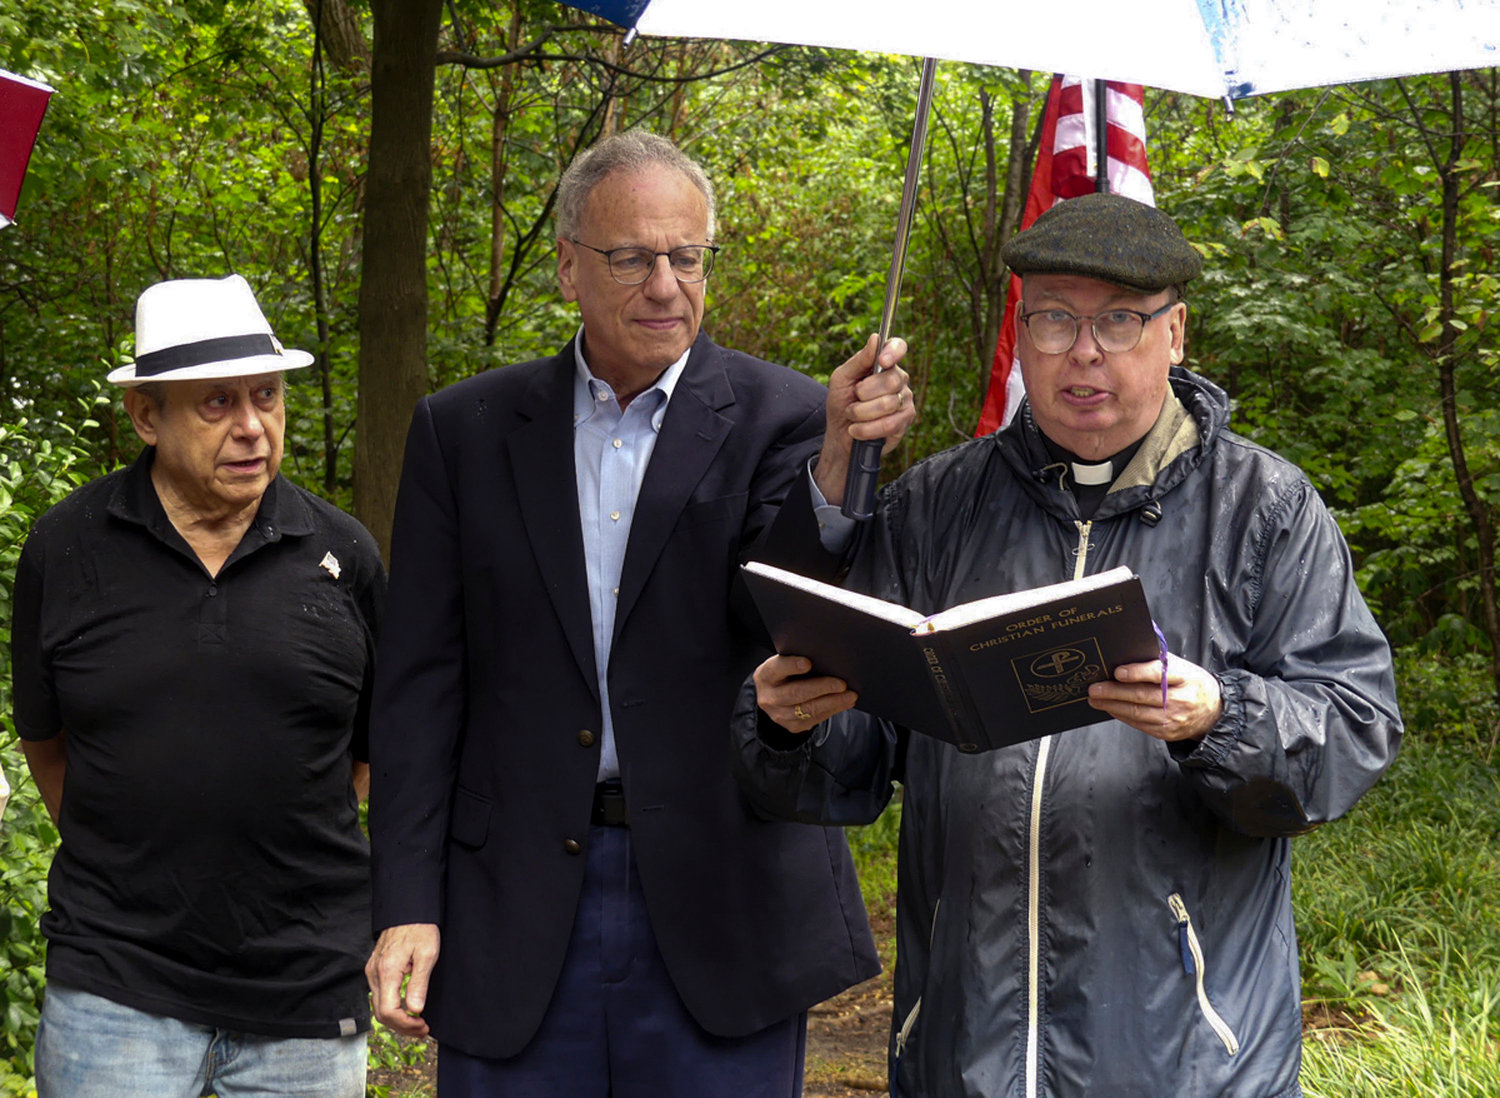 Assemblyman Jeffrey Dinowitz at Endor Community Garden during the 9/11 memorial in Riverdale, NY on September 11, 2022.